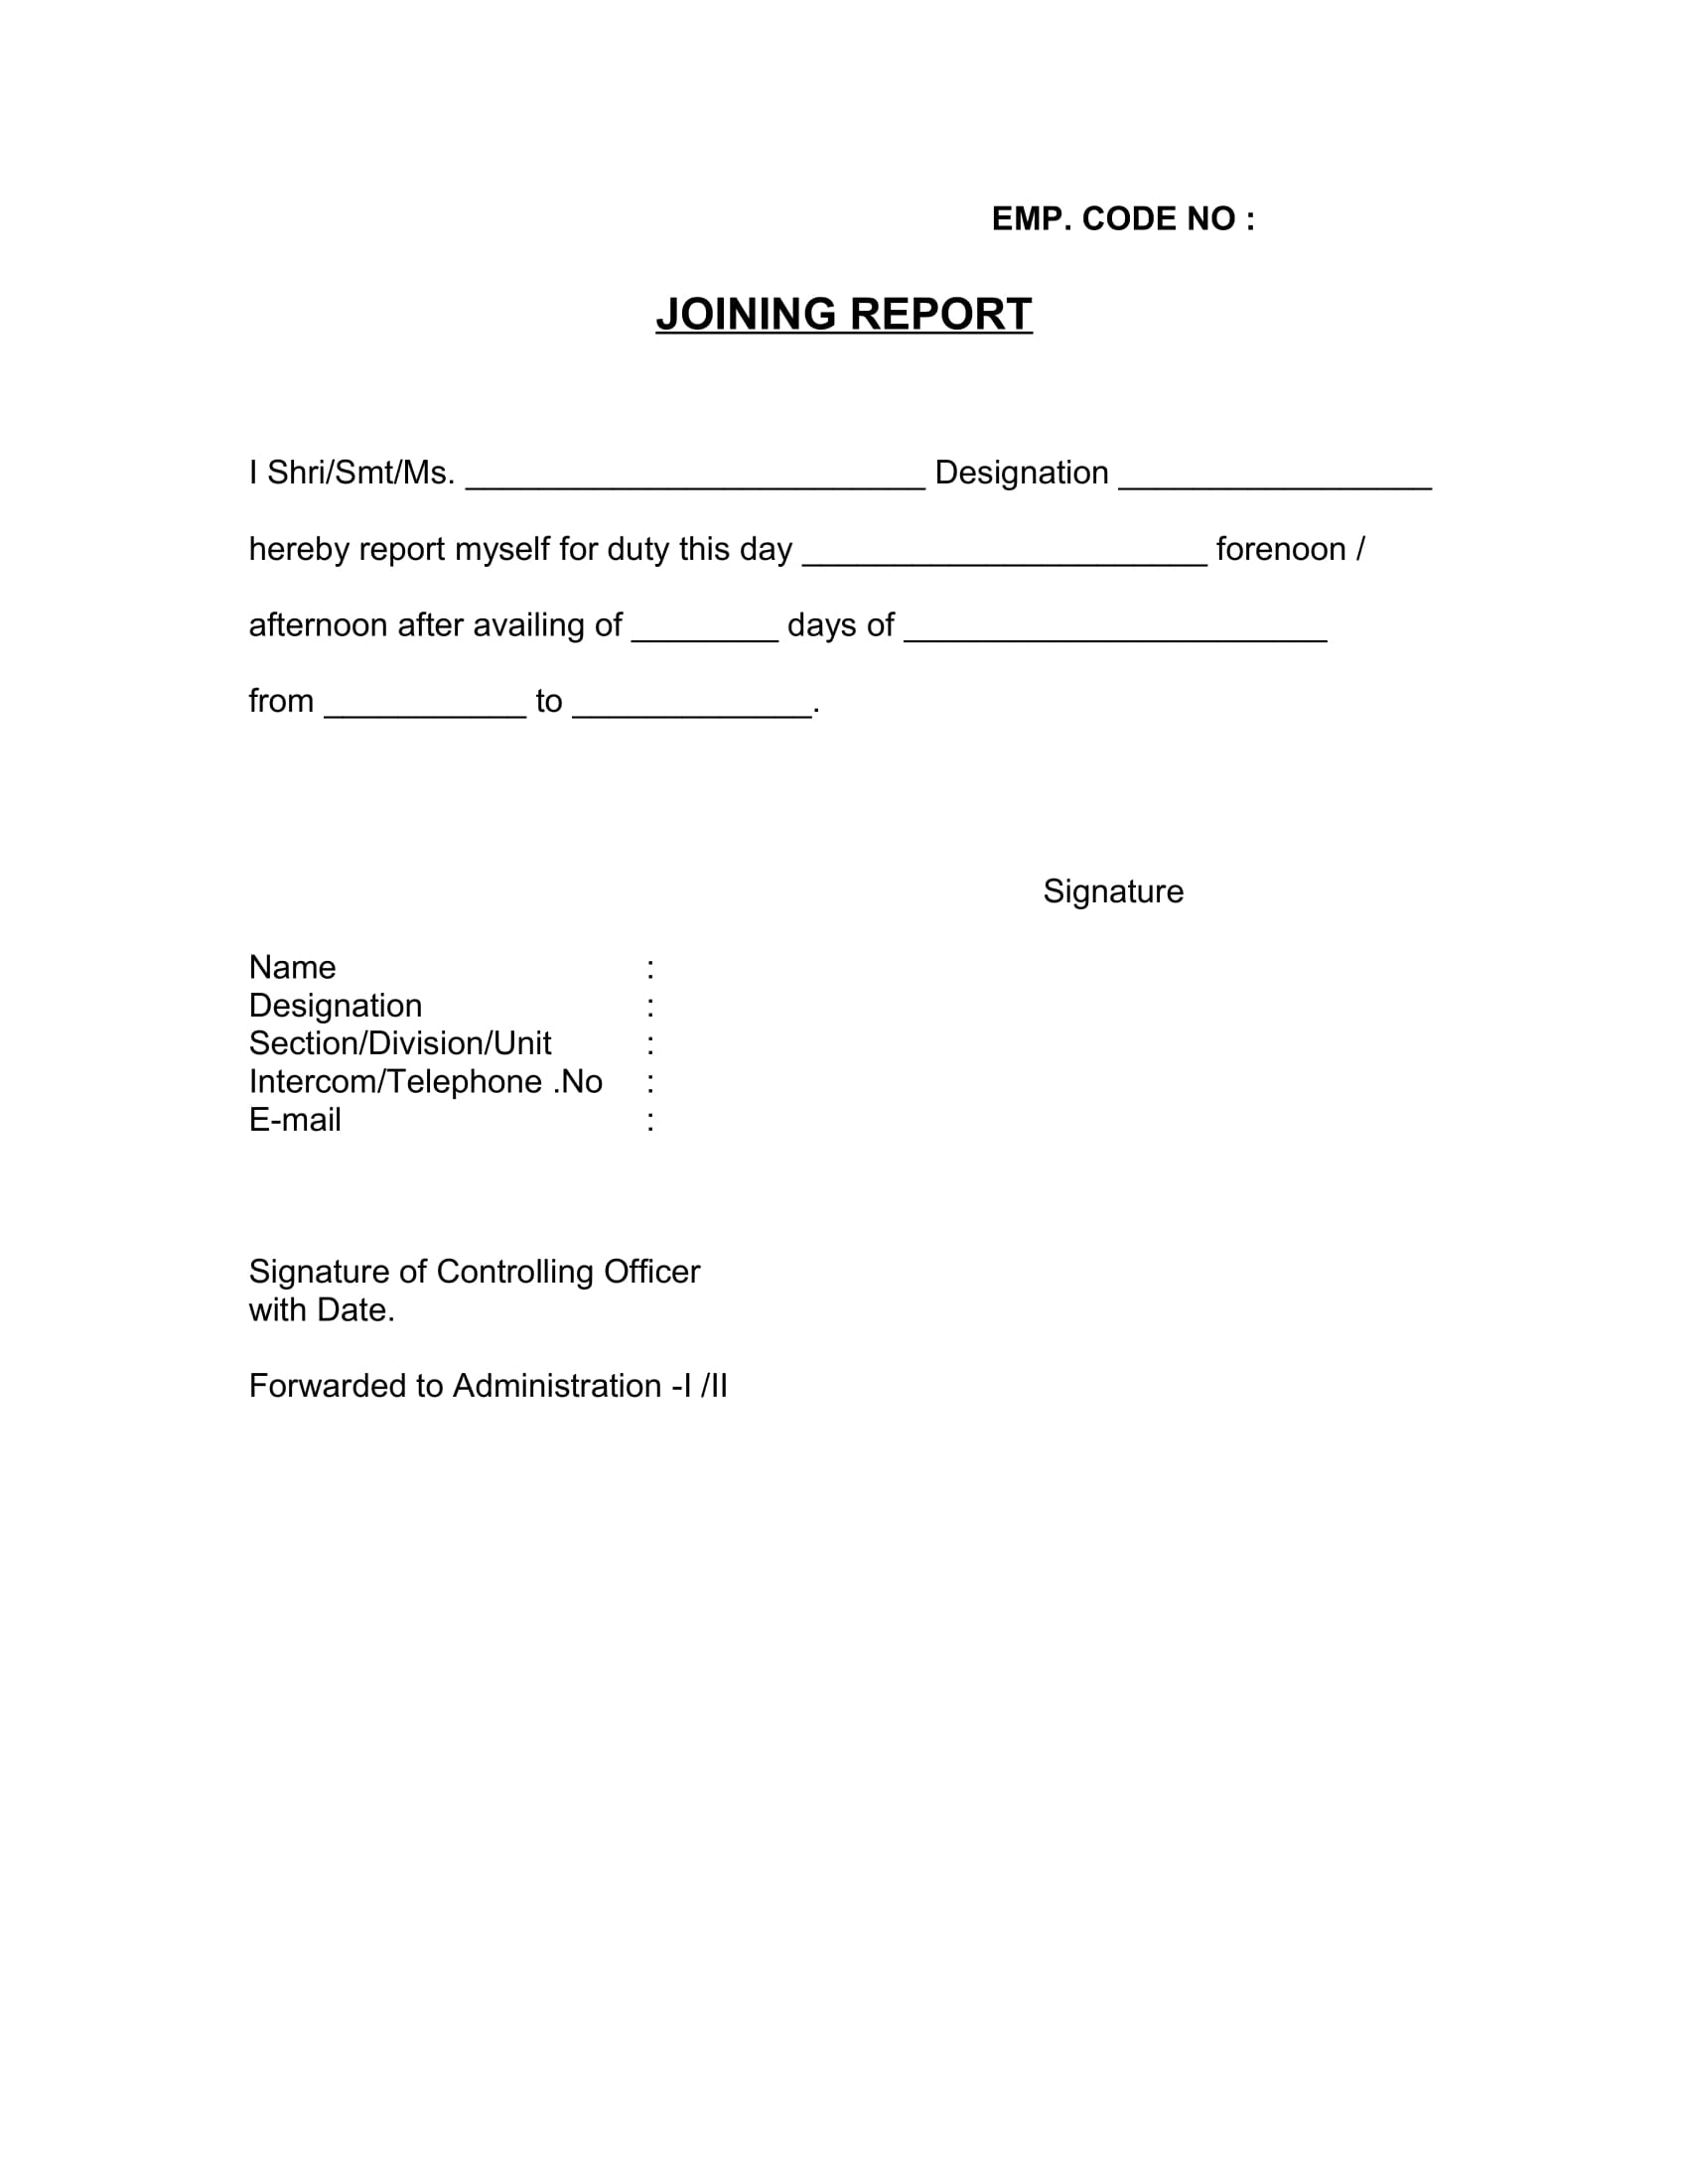 basic joining report form sample 1